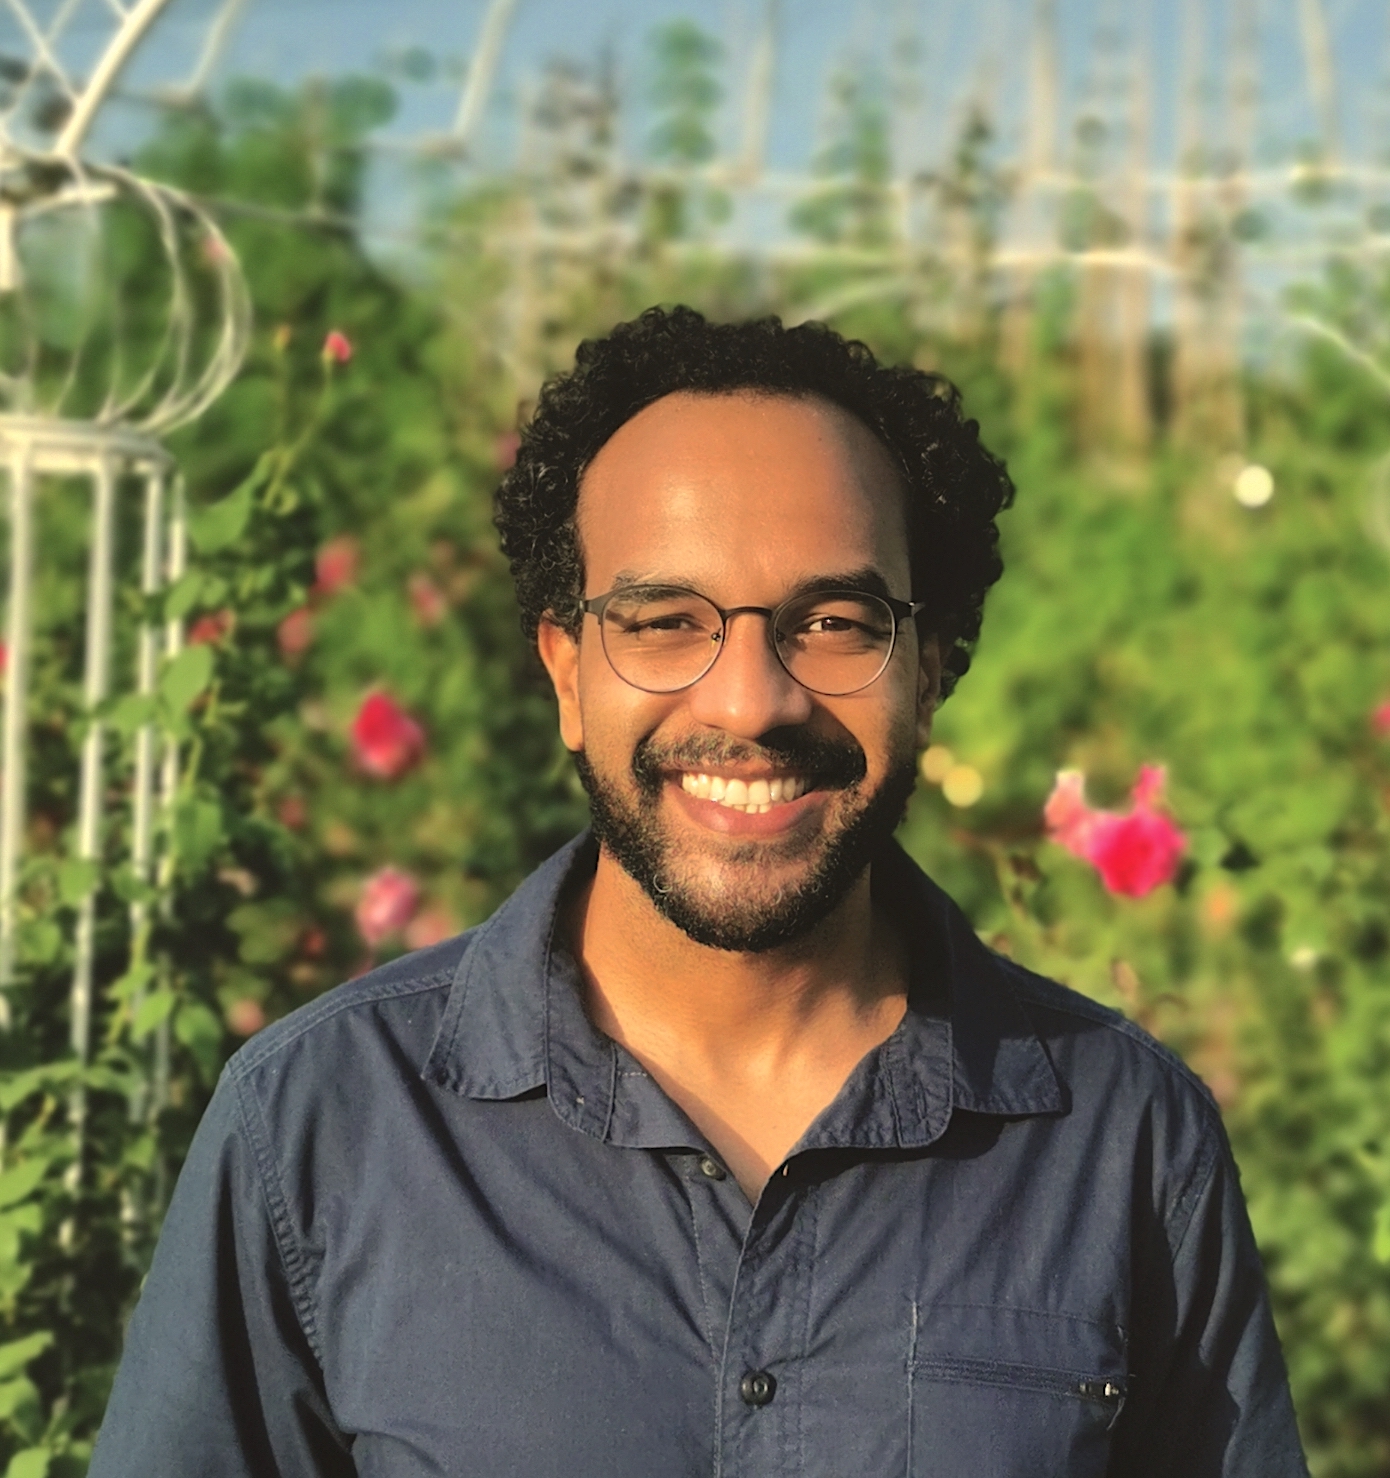 A man with black curly hair and glasses stands smiling in front of a garden.